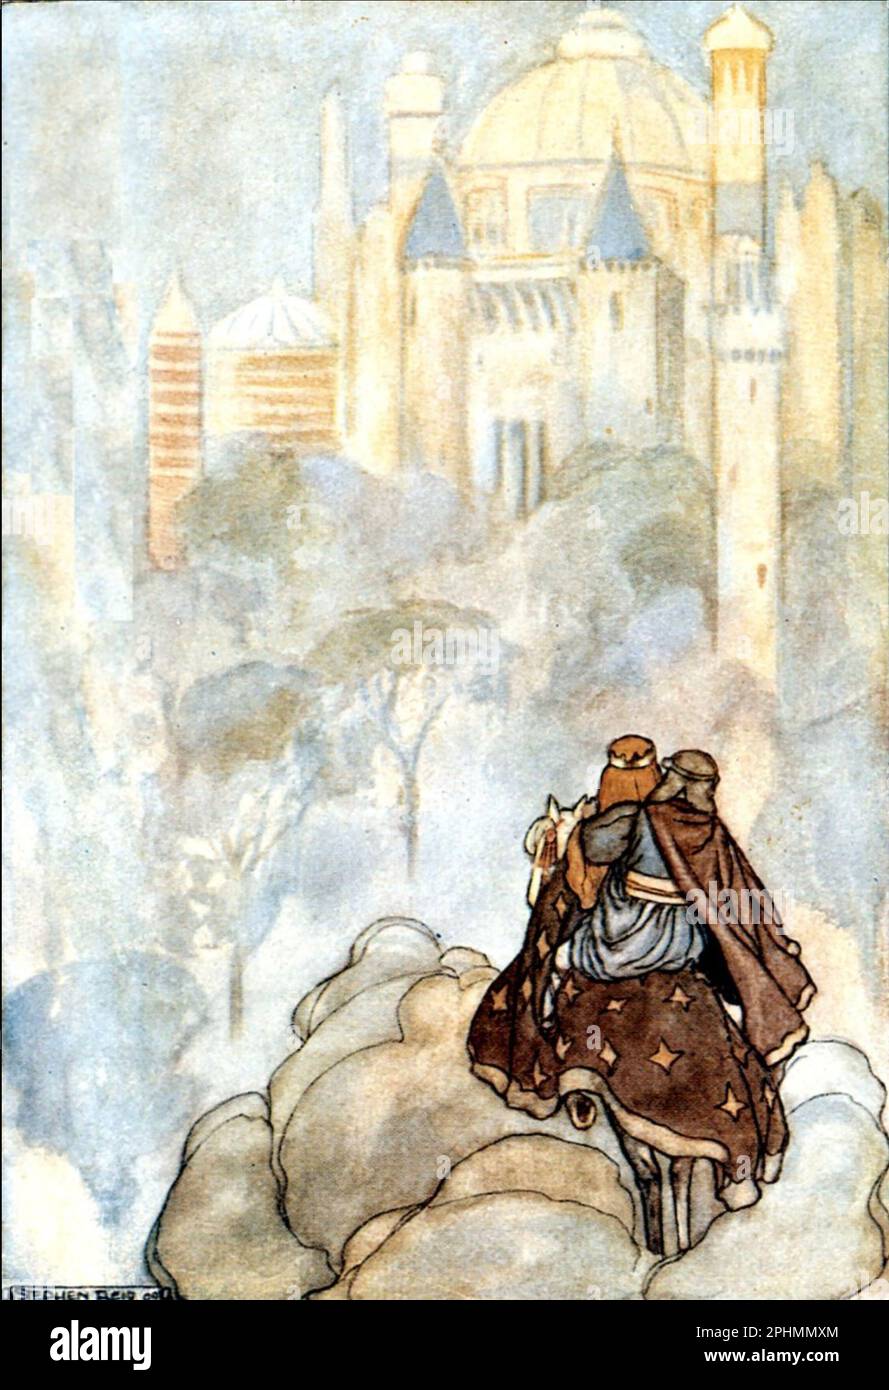 Tír na nÓg  - Land of Youth  -  a Celtic myth in an  illustration by Scottish artist Stephen Reid from a 1910 book showing Oisin and Niamh approaching the Land of Youth. Stock Photo